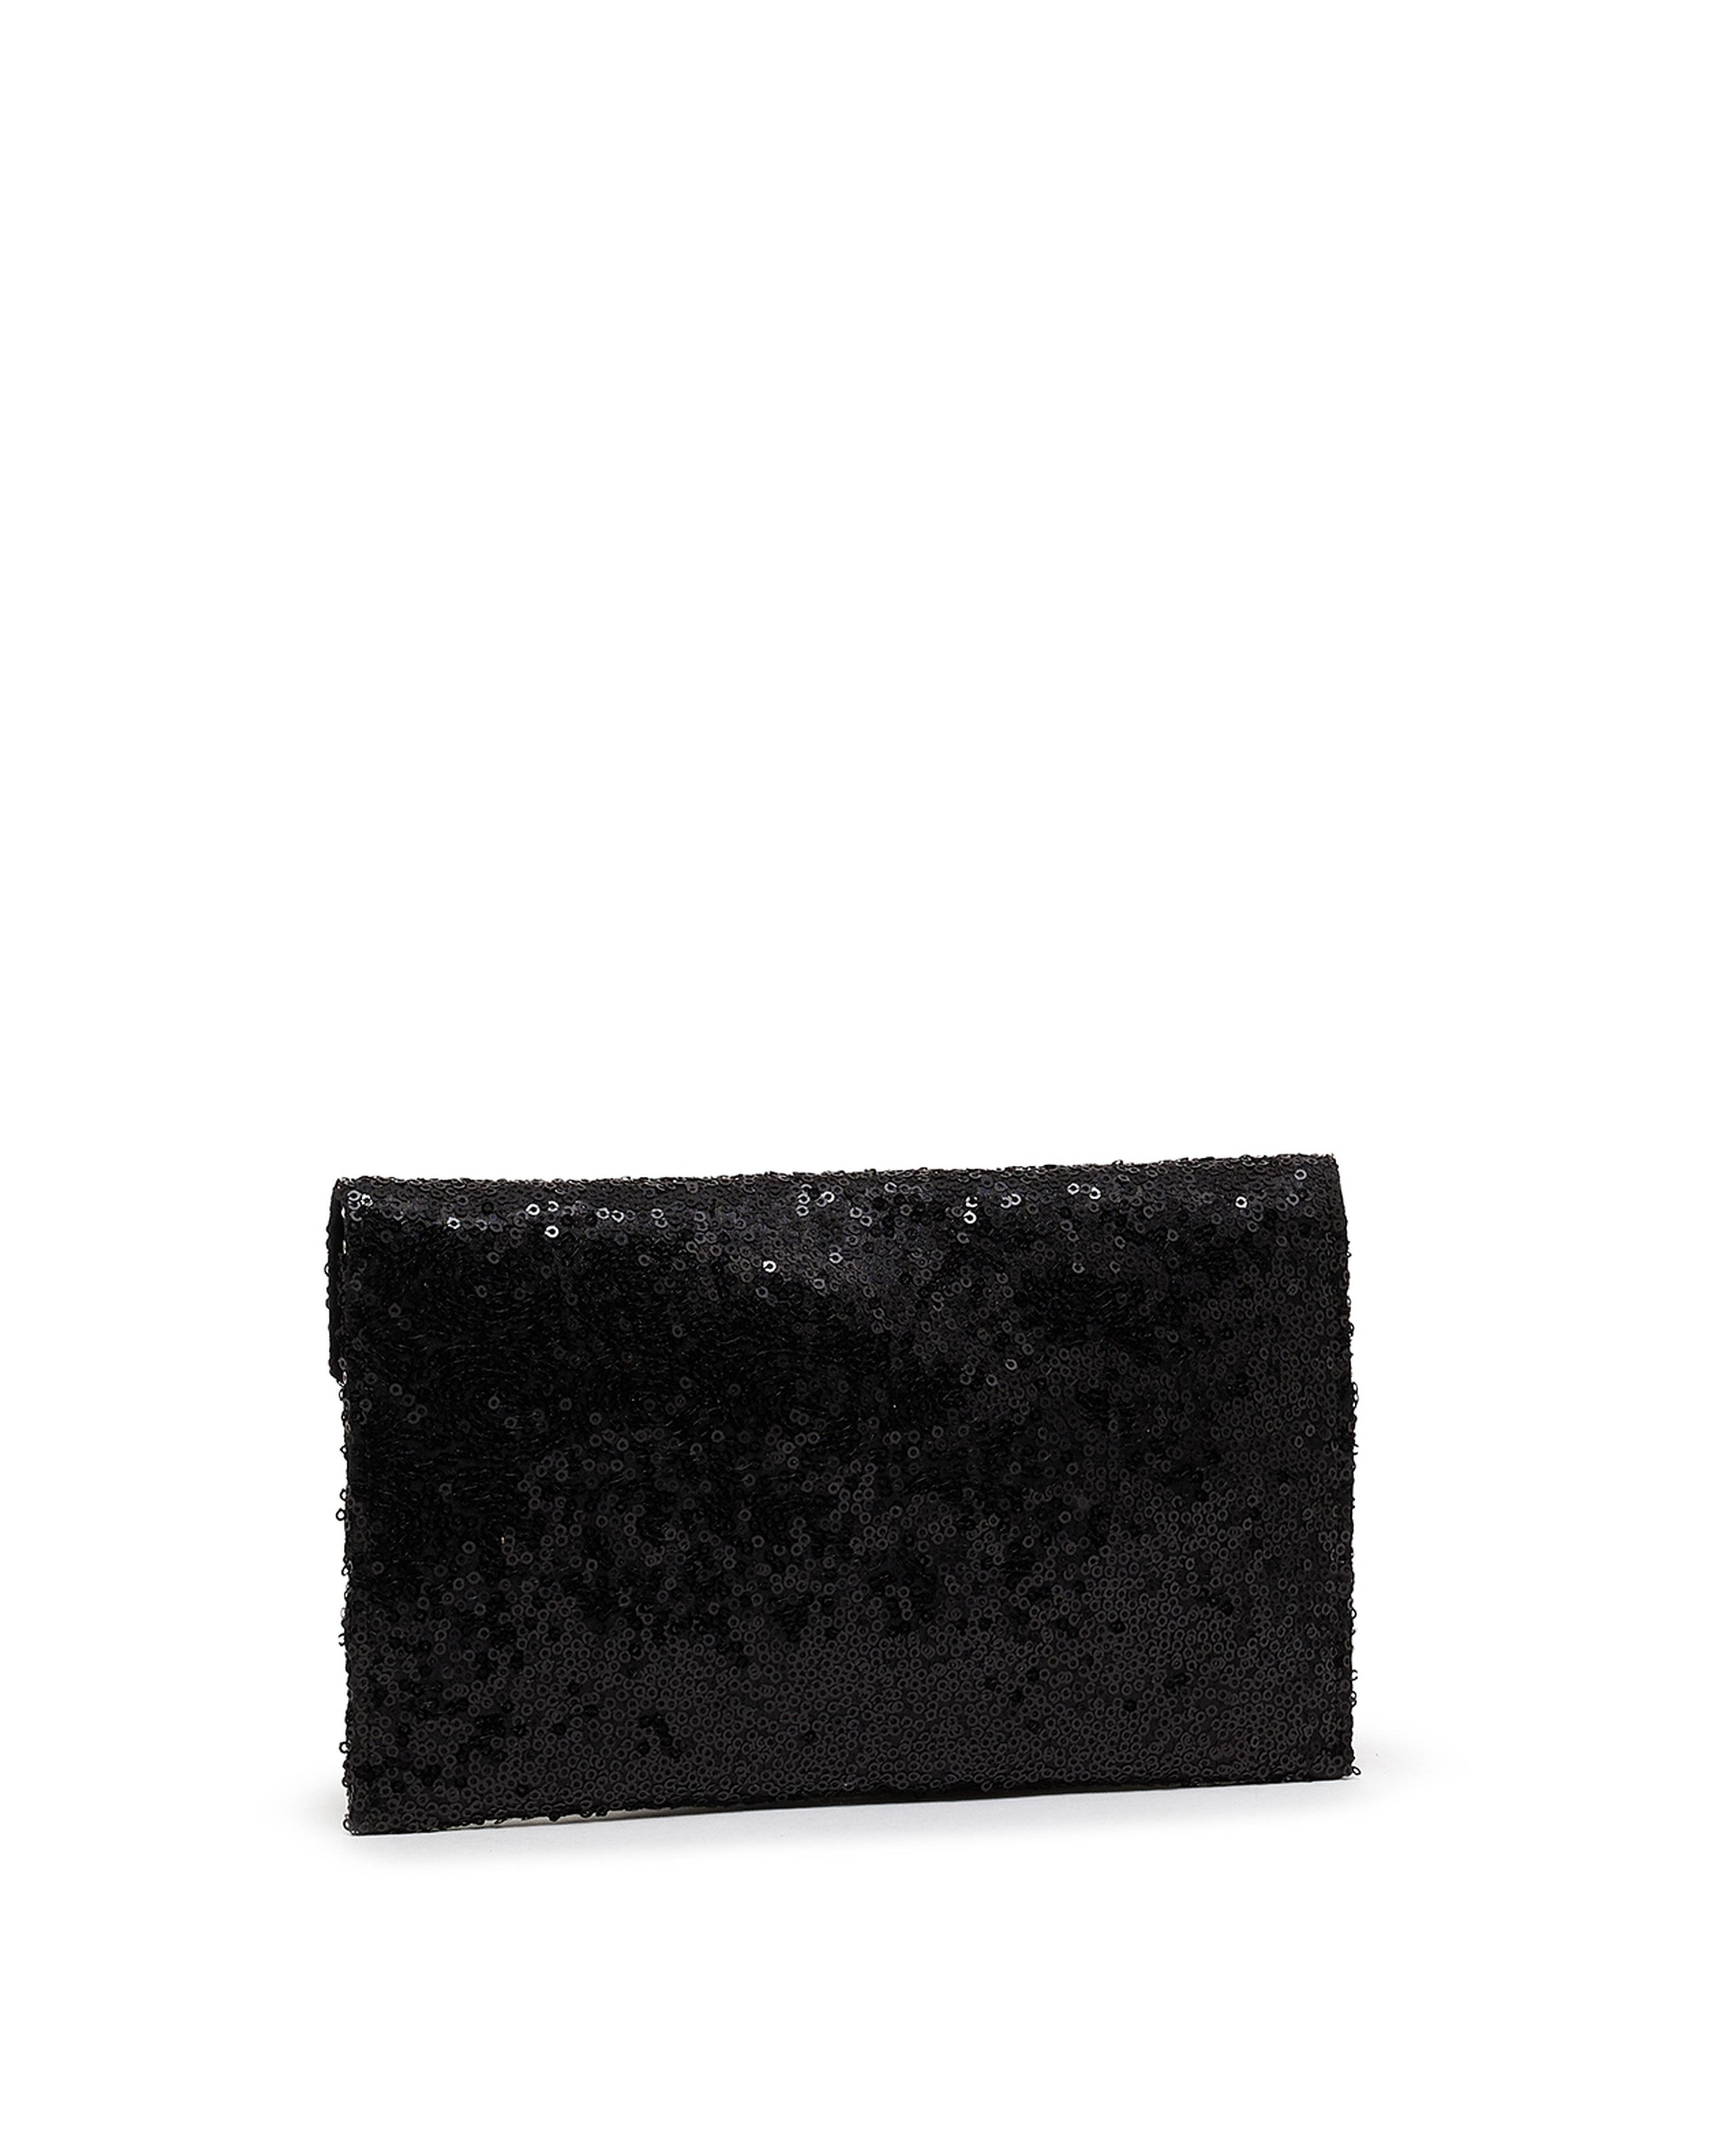 Sequined Envelop Clutch with Sling